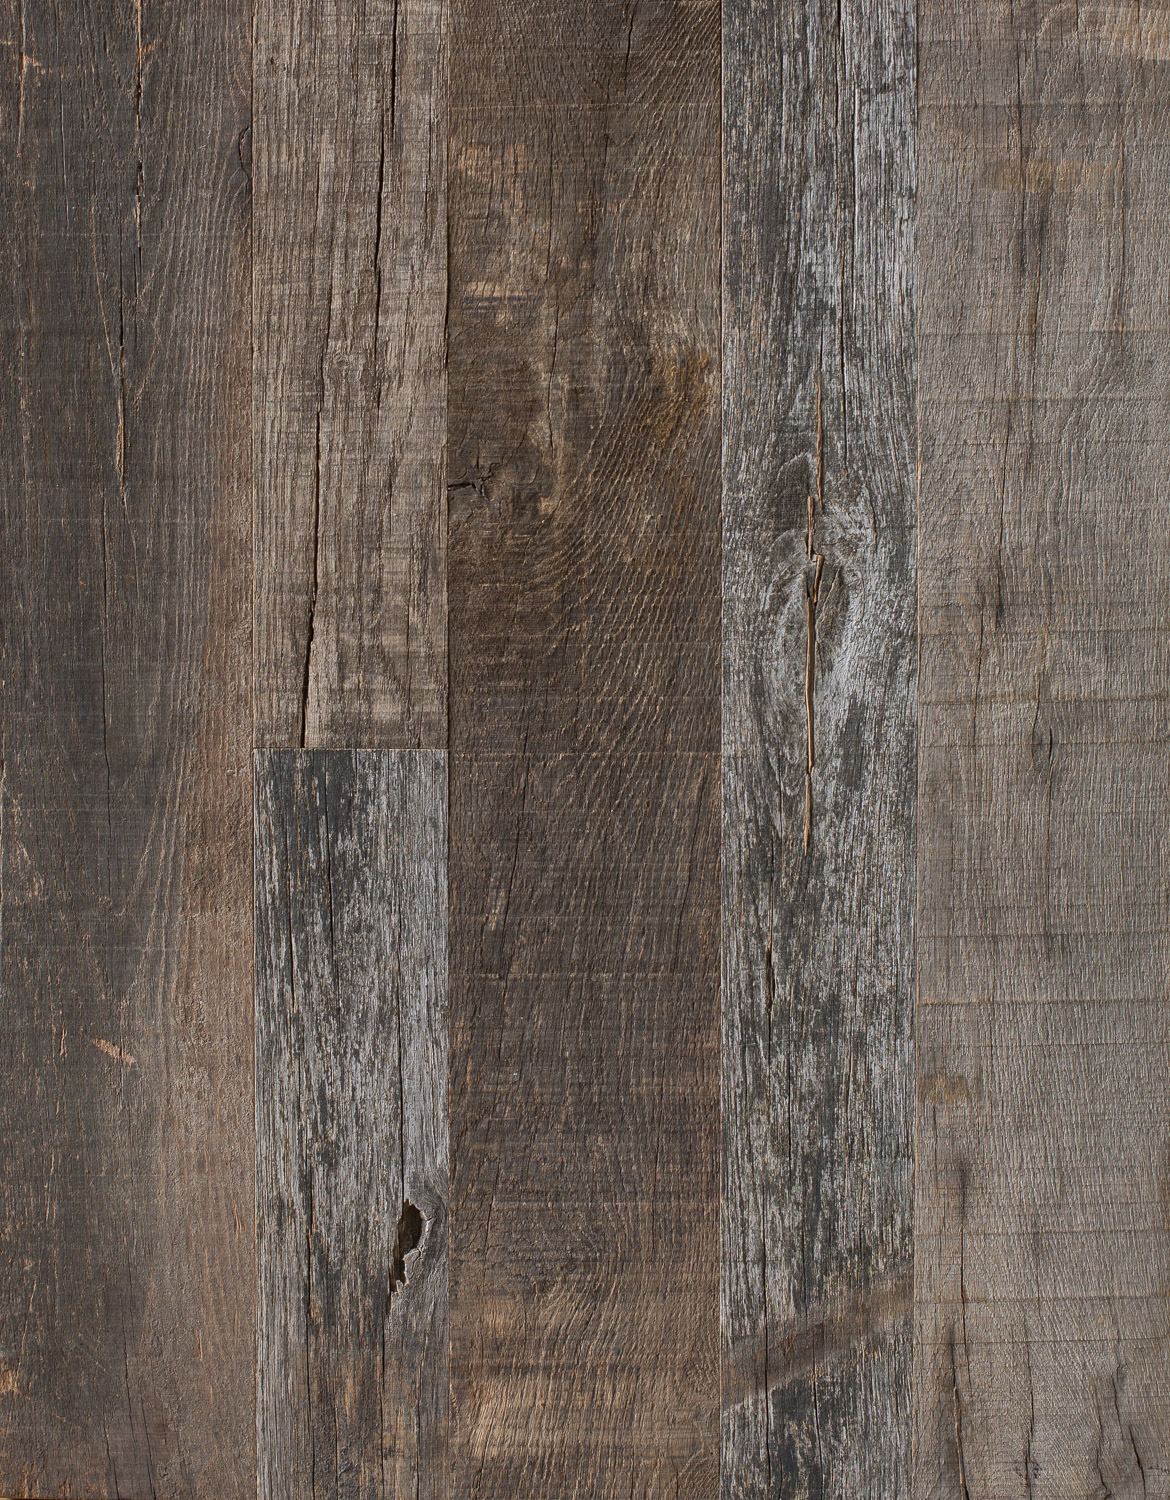 How Often To Oil Wood Flooring (2020 updated)